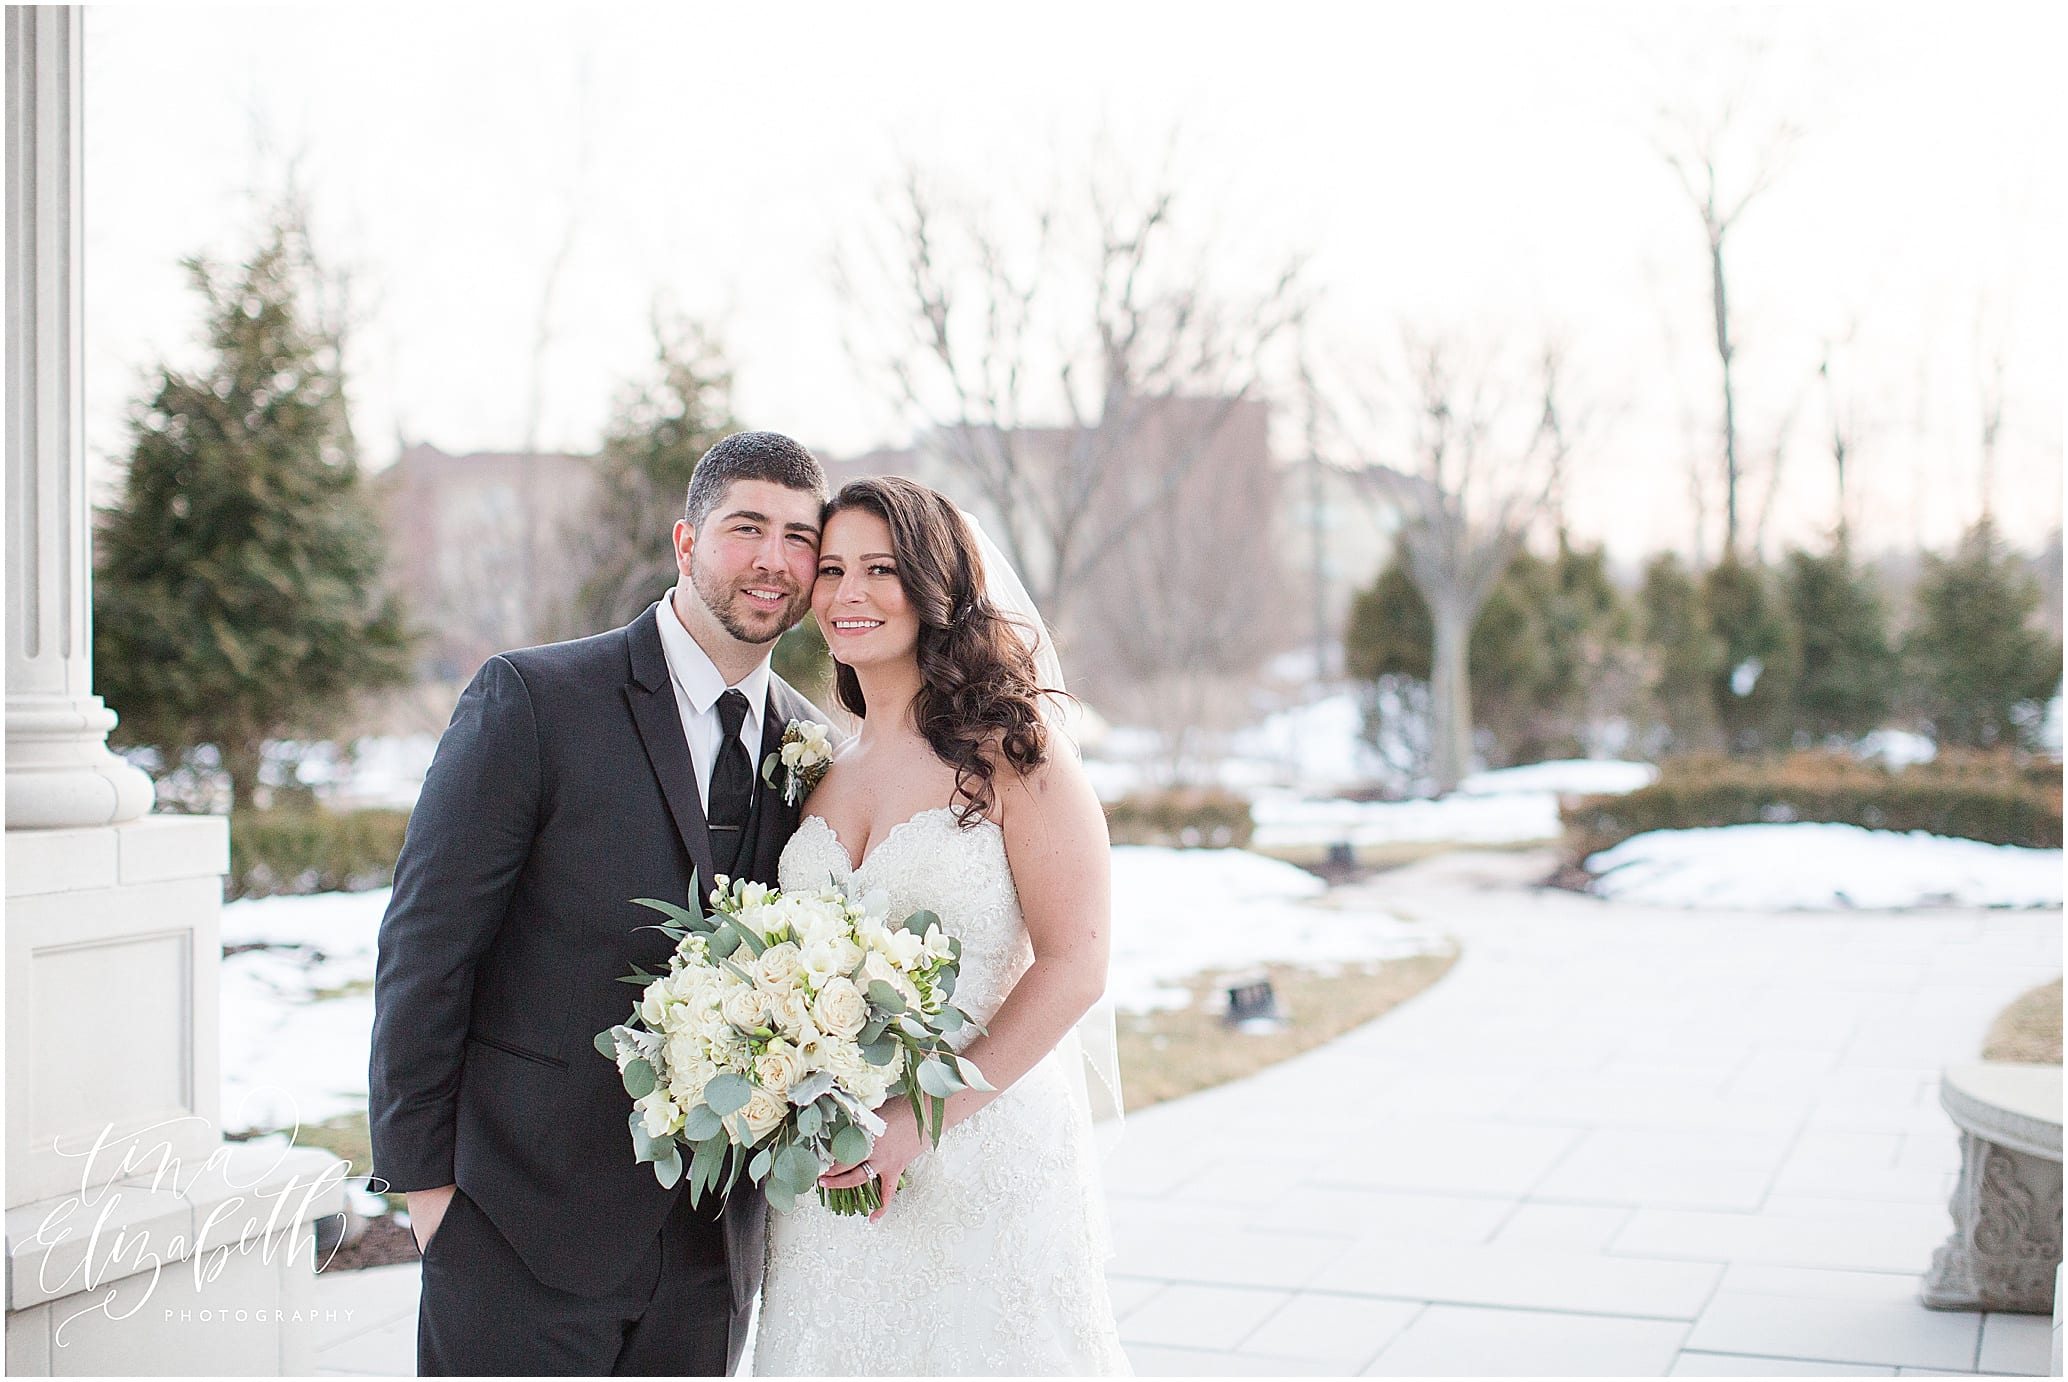 The Palace at Somerset Park winter wedding by Tina Elizabeth Photography